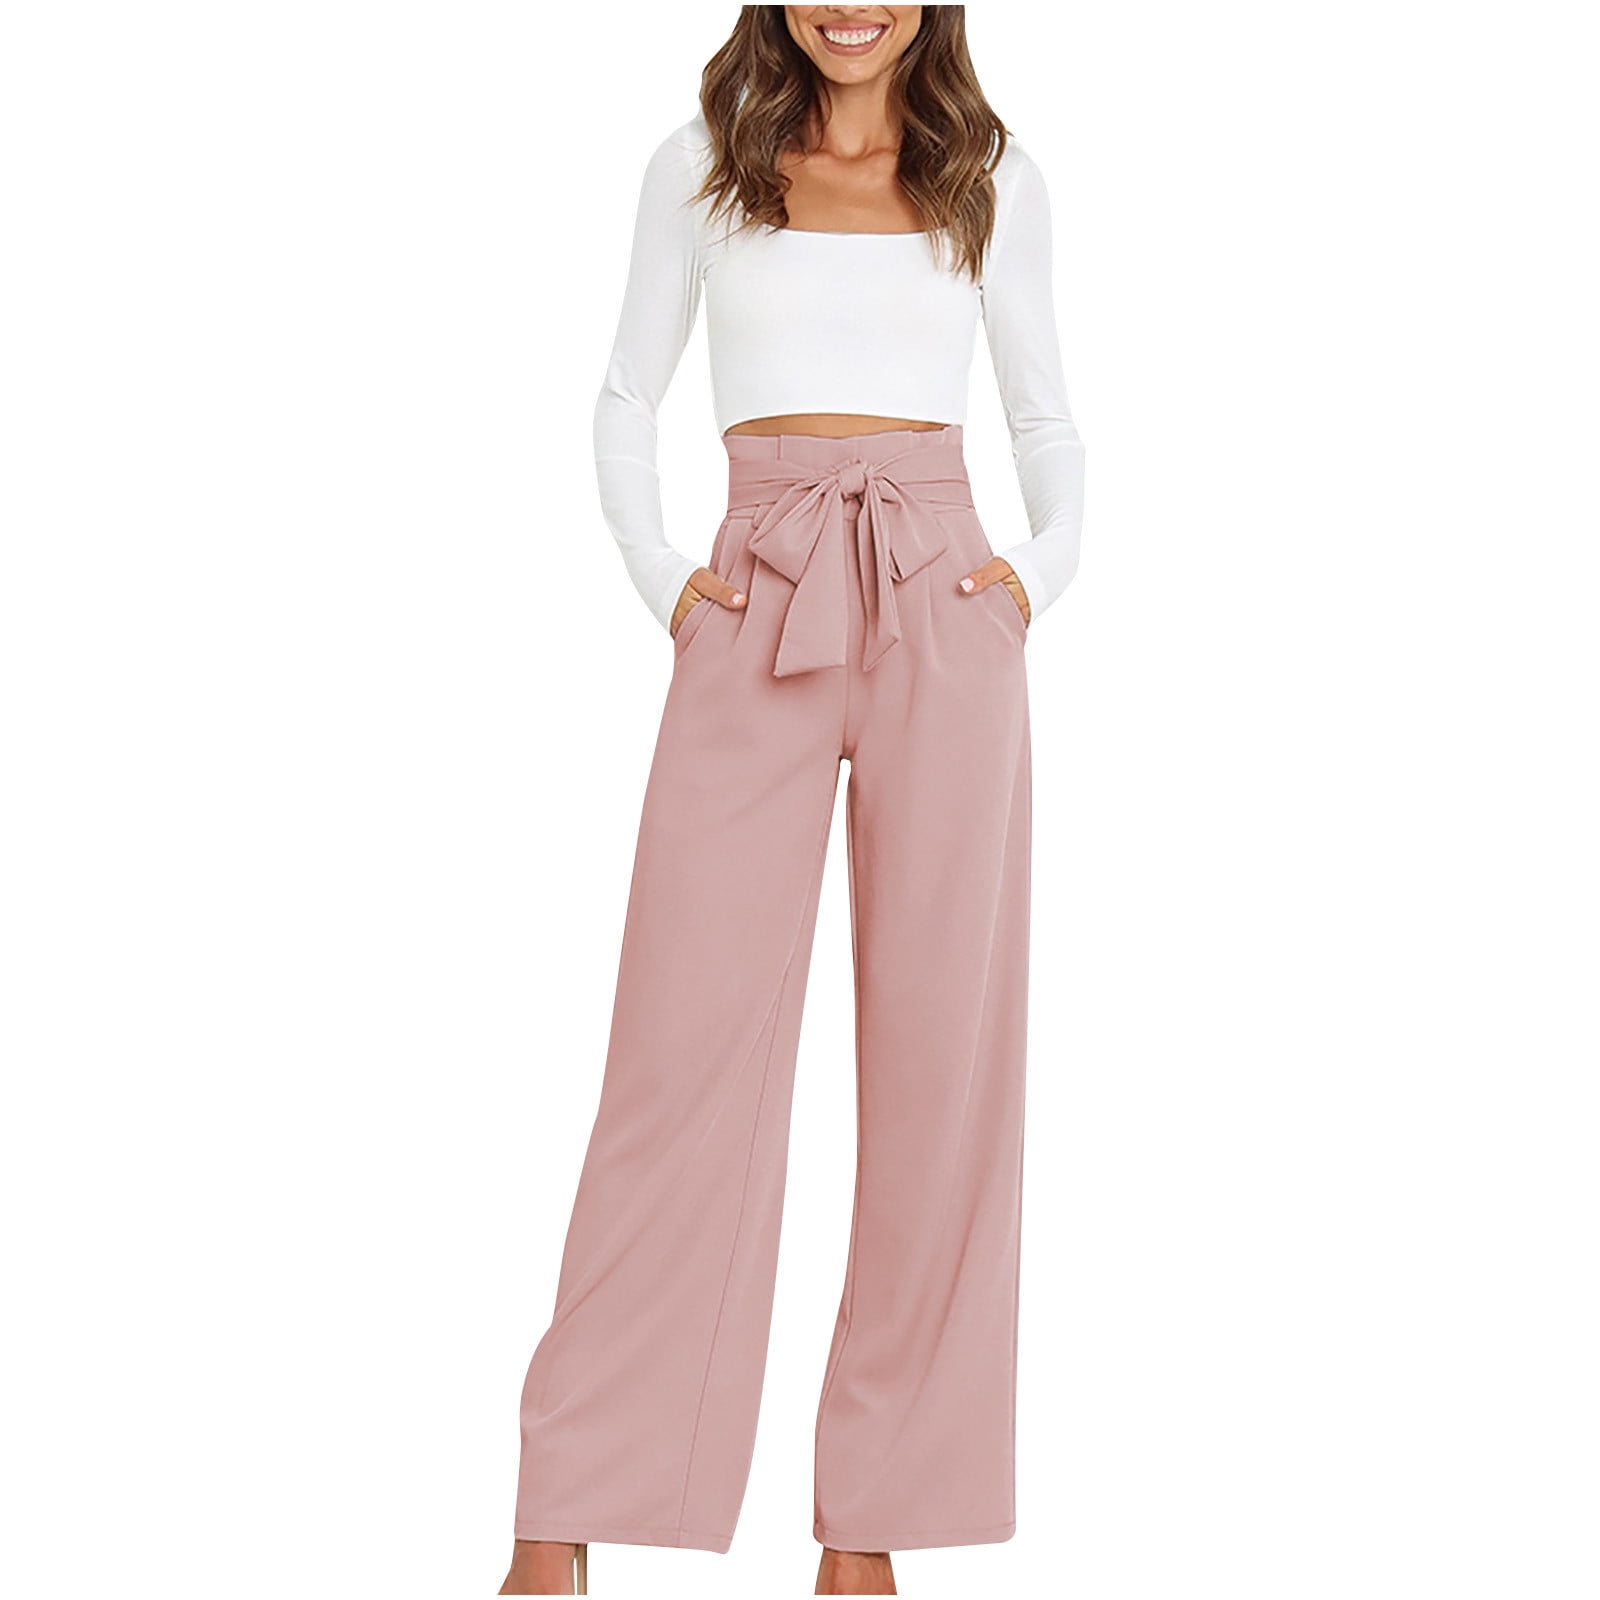 How to Style Wide-Leg Pants for Summer | Hello, Her